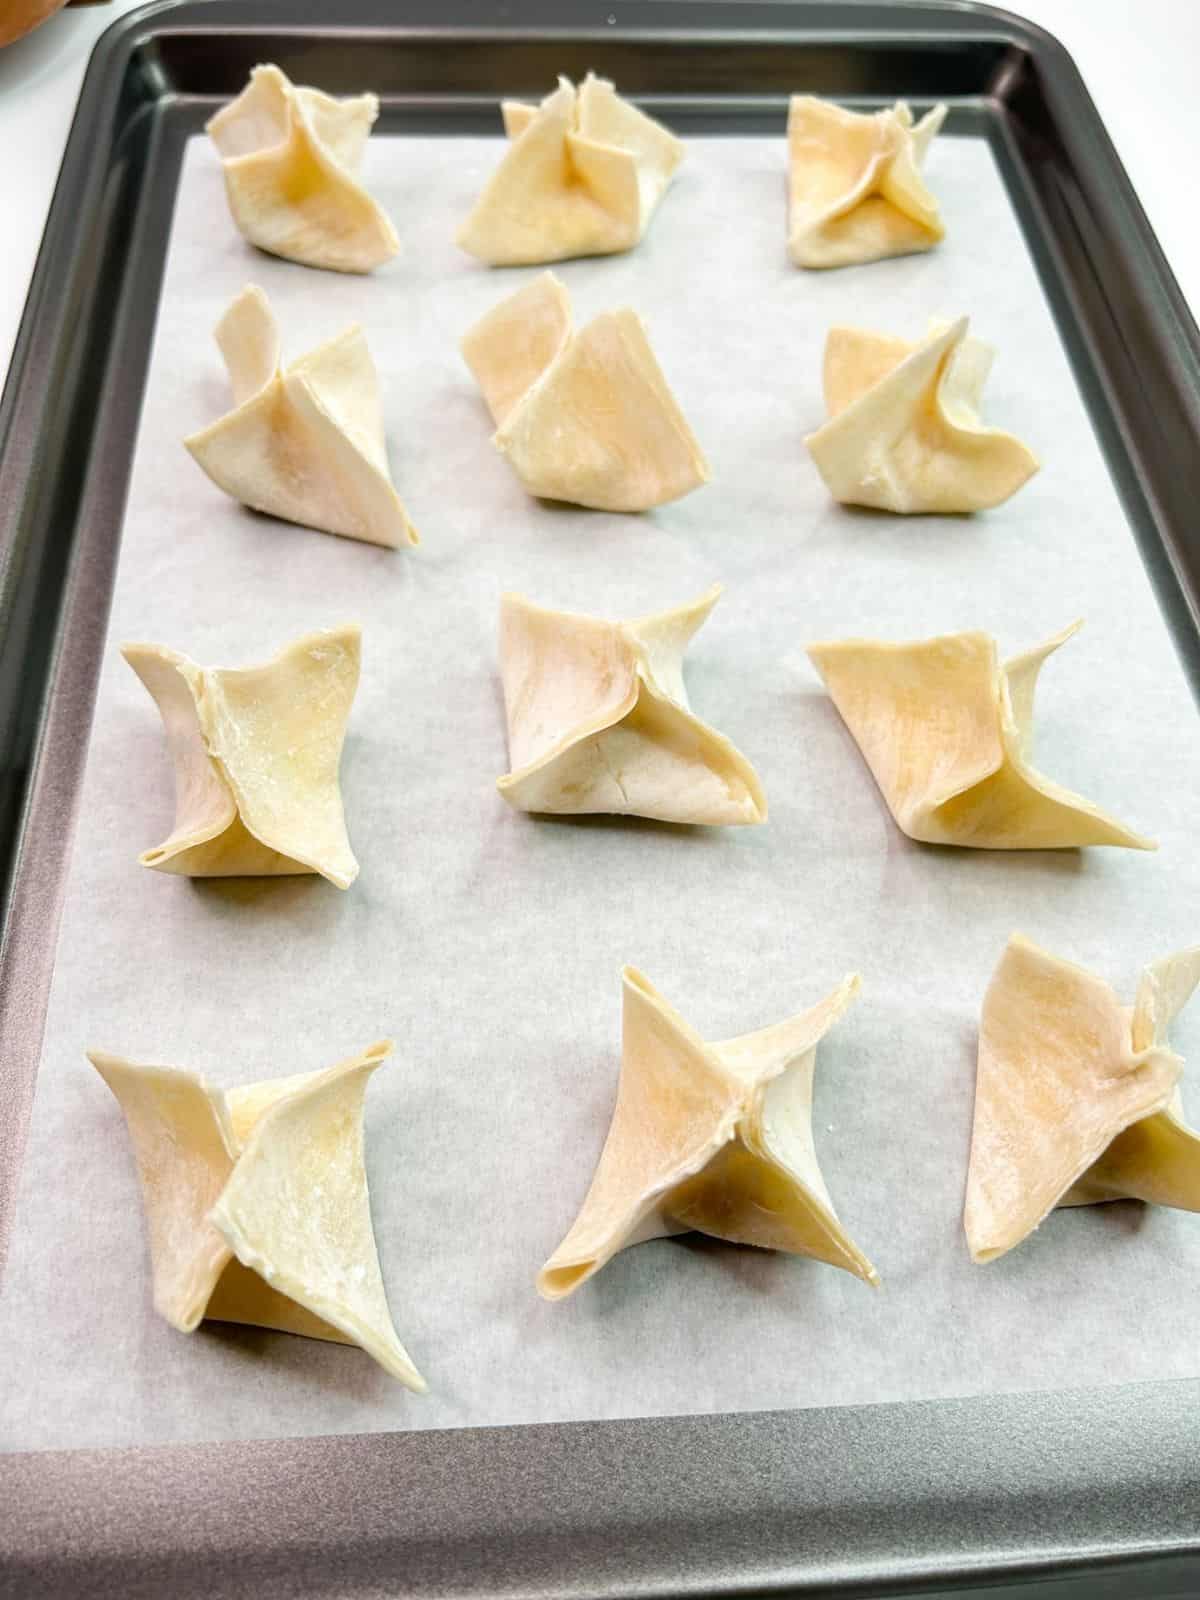 won tons formed on baking trays with parchment paper.